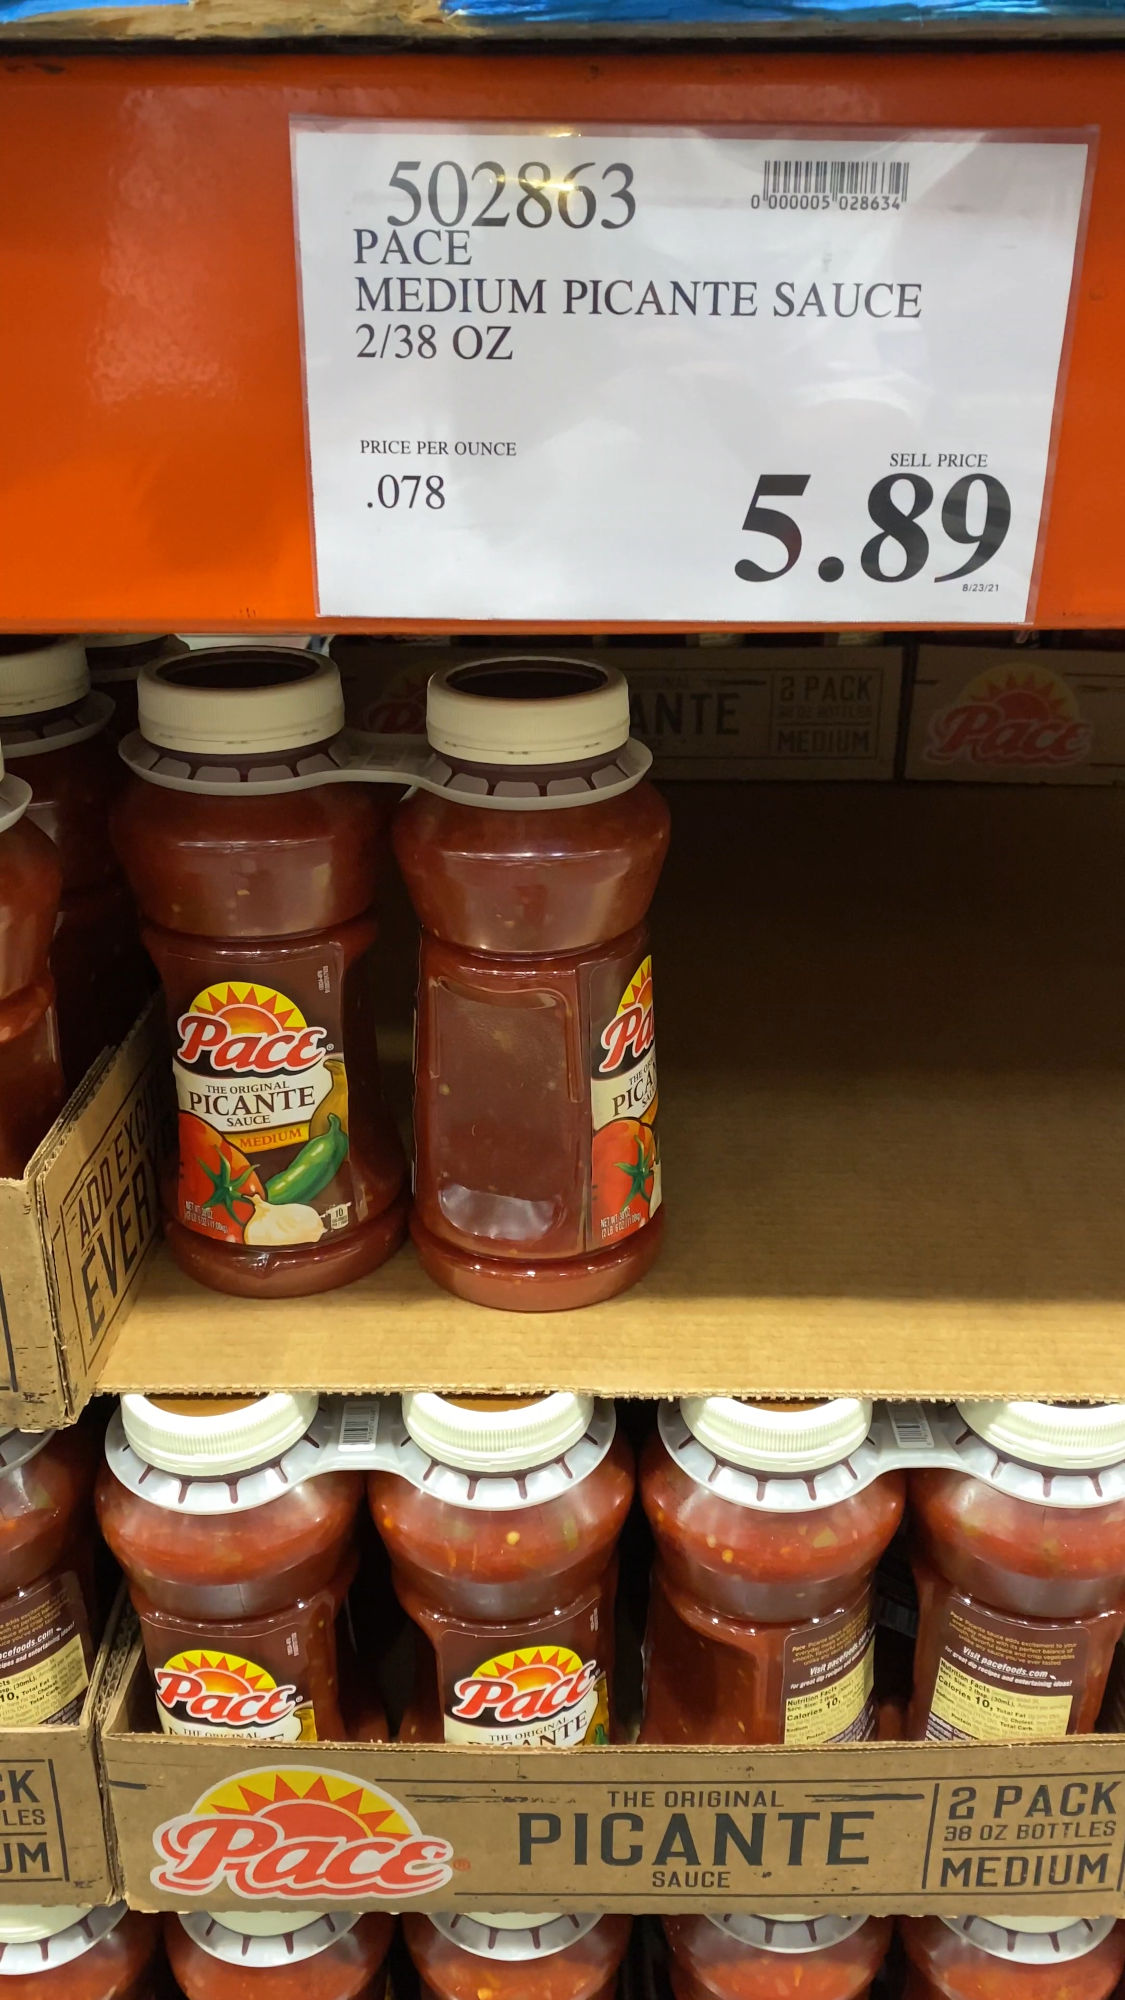 Pace Picante Sauce Costco $5.89 for 2 large